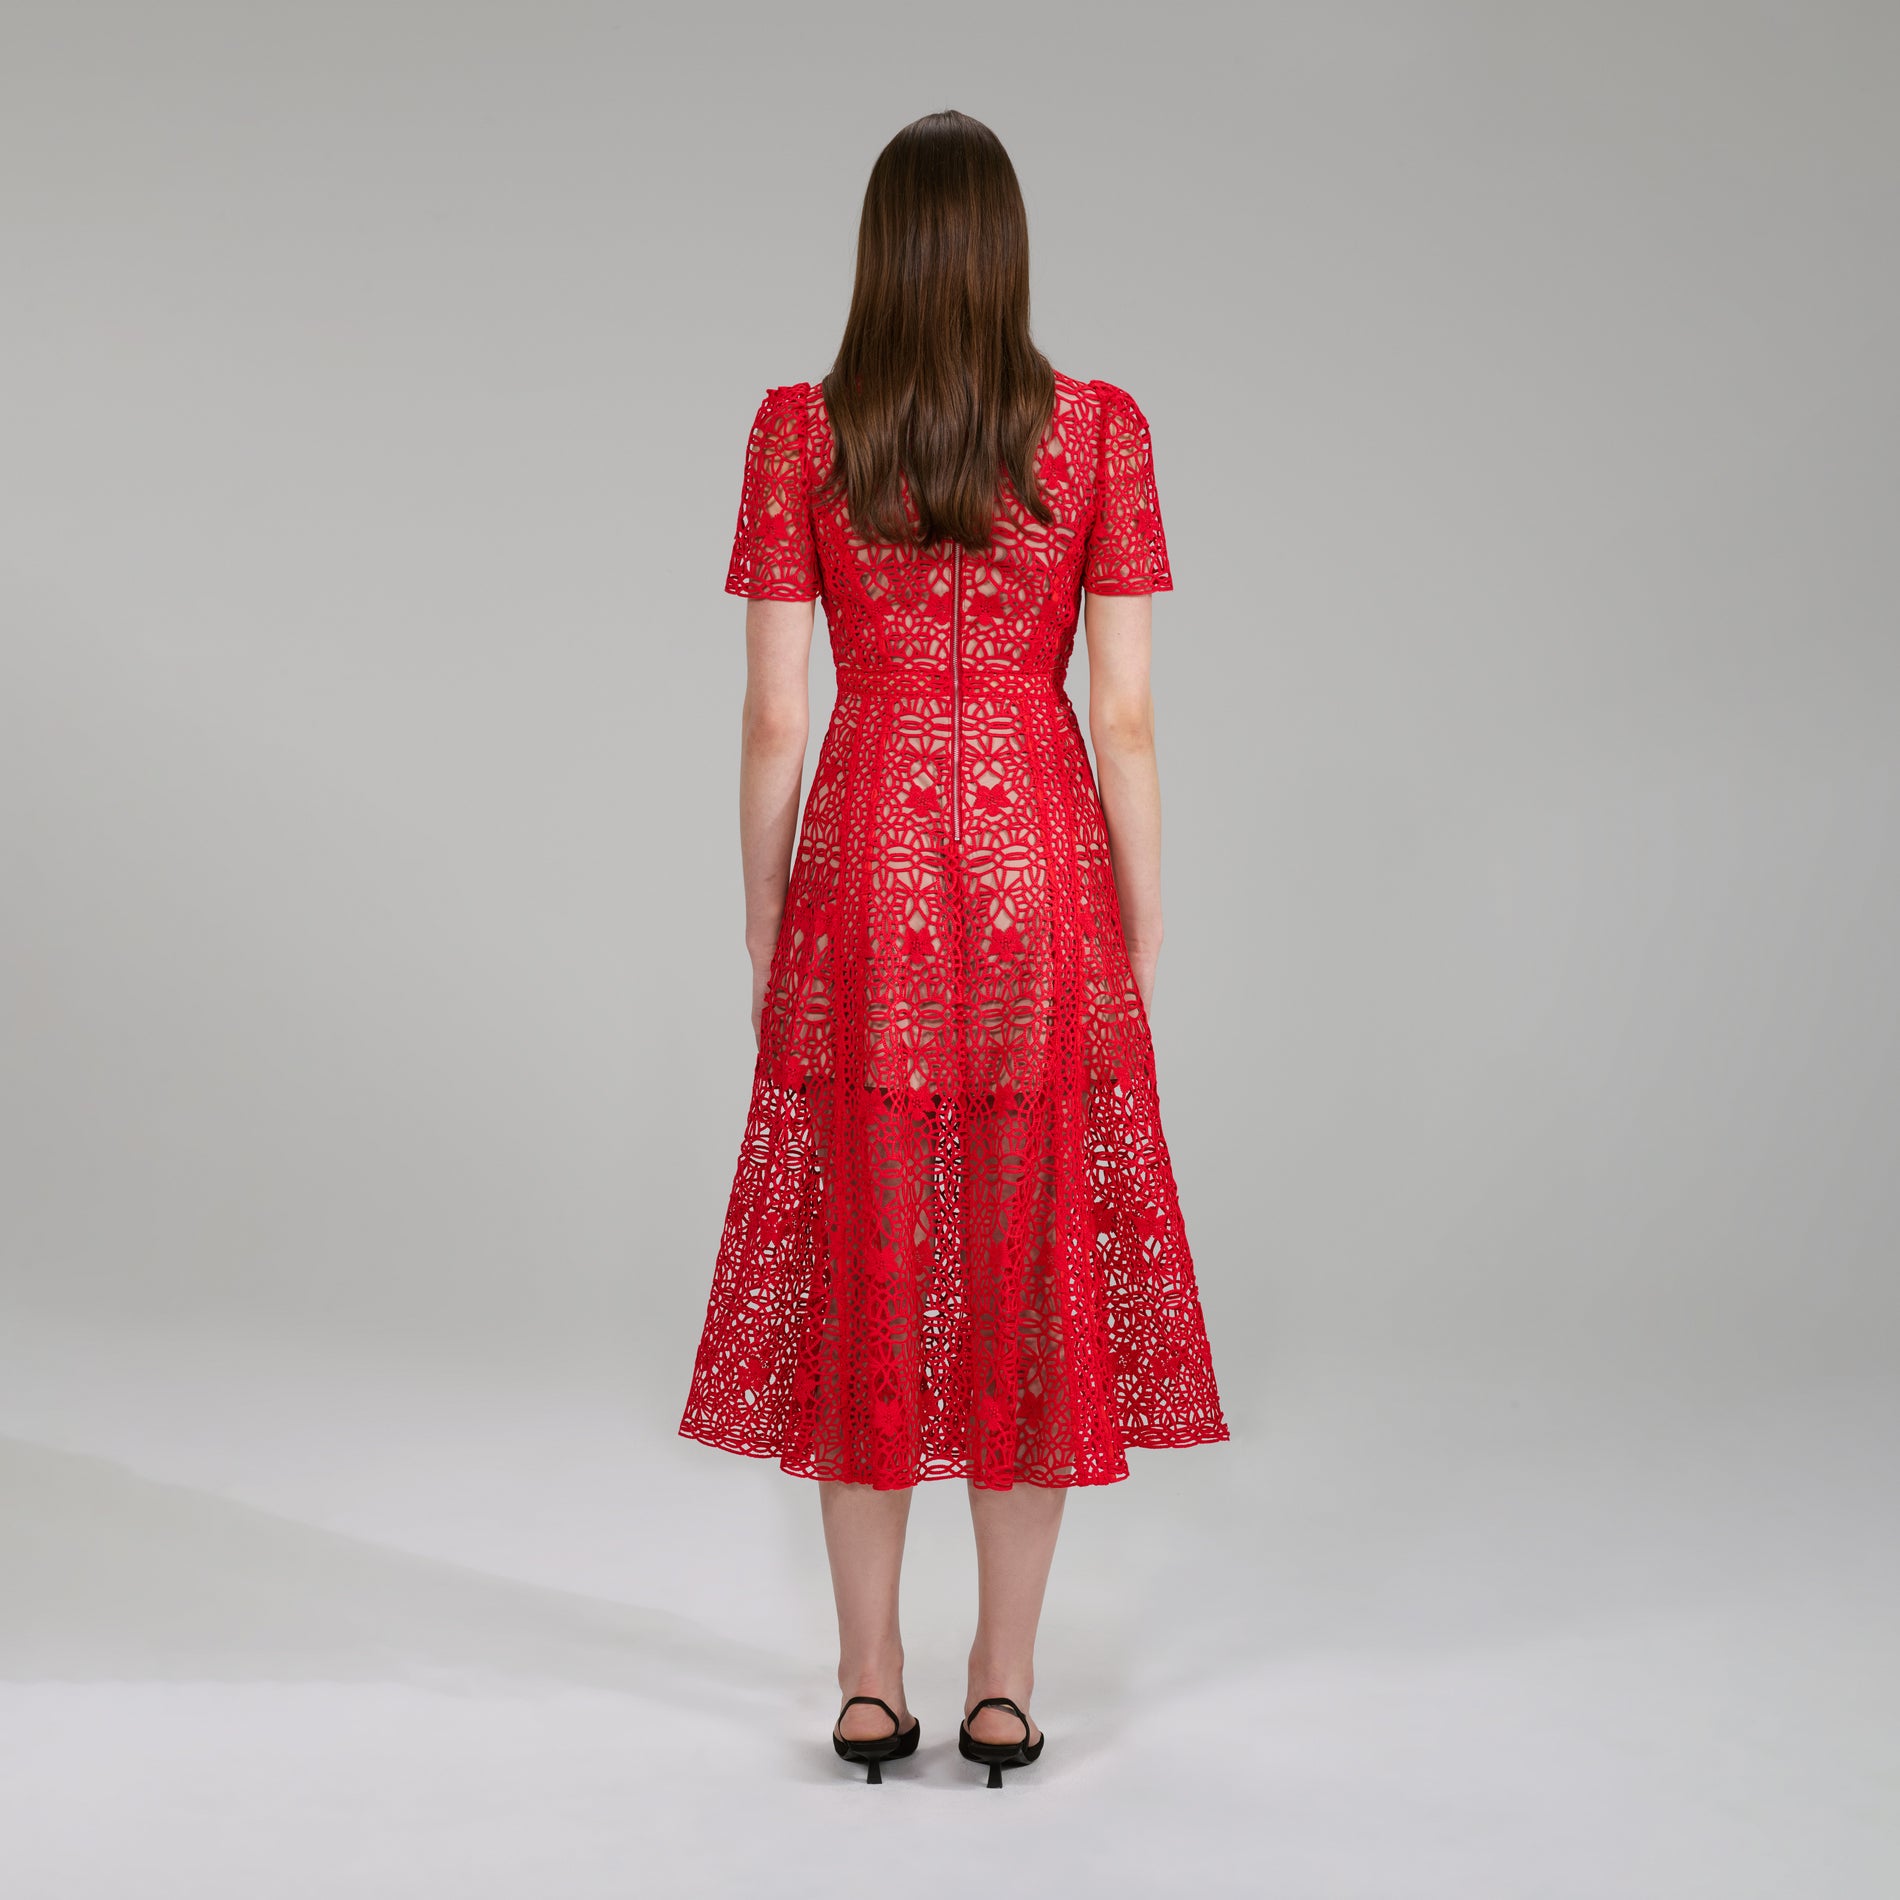 A woman wearing the Red Guipure Lace Midi Dress